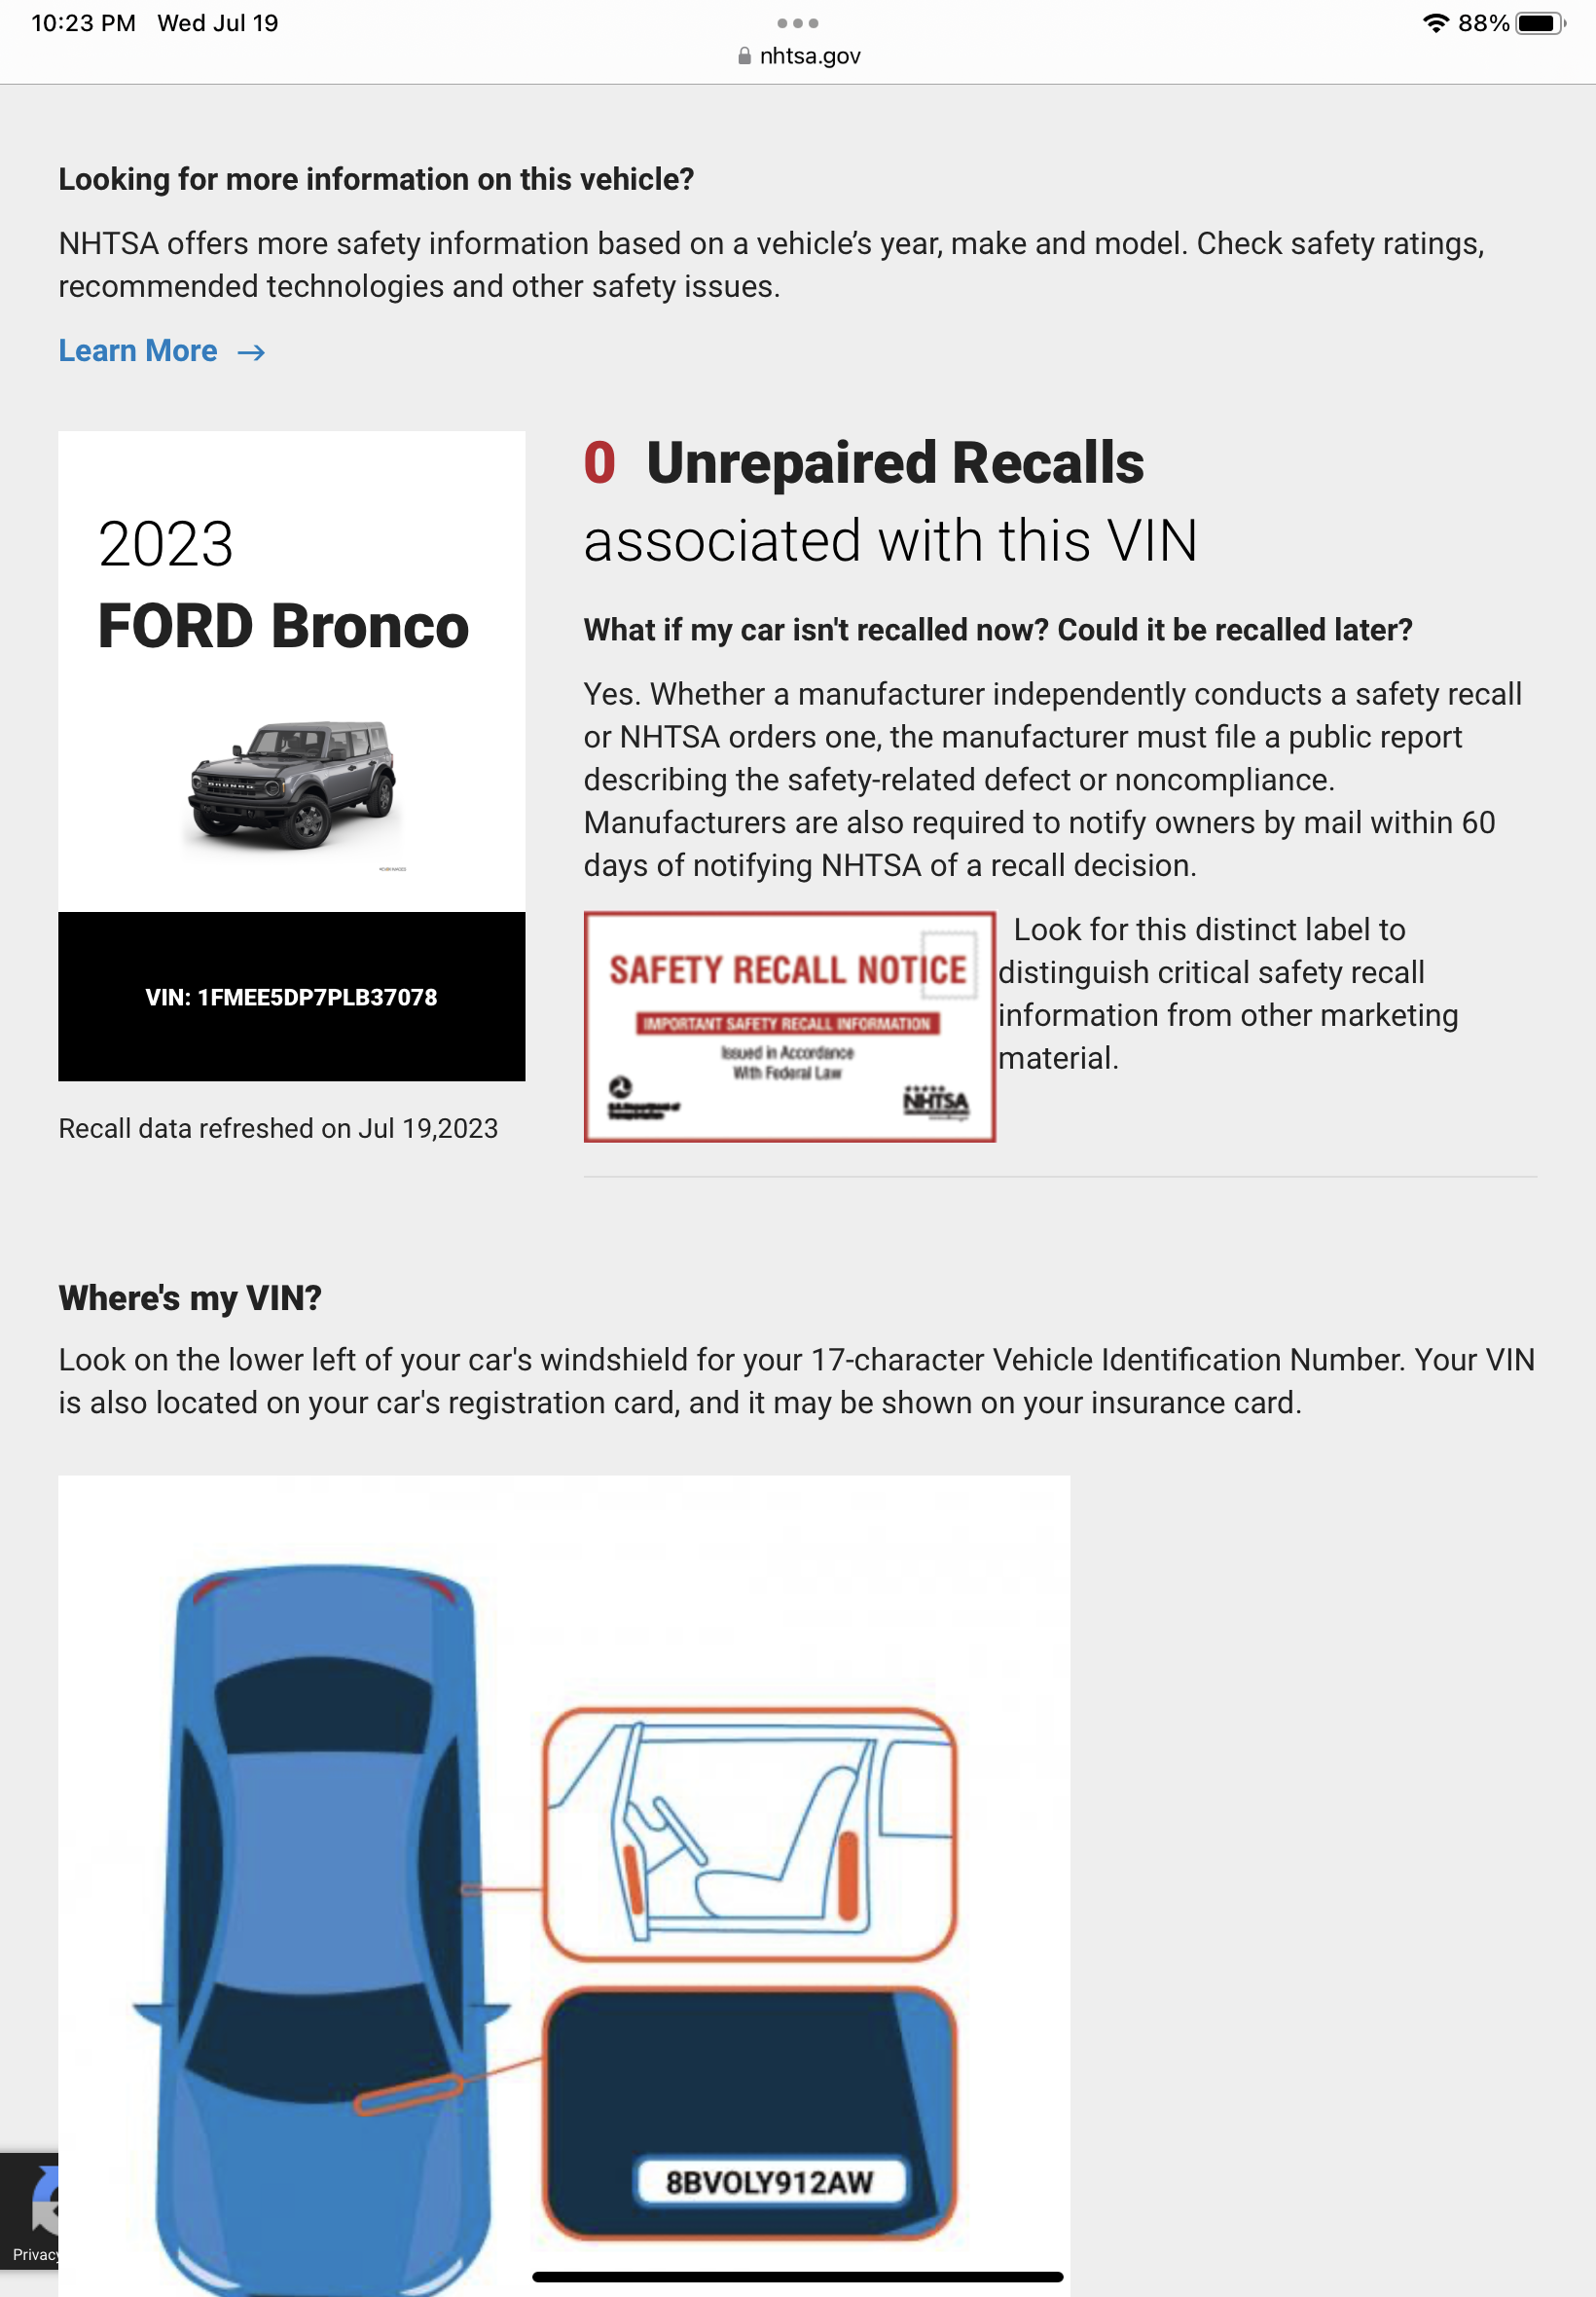 Ford Bronco Recall 23C16 & Delivery Hold : Seat Belt Latch Plate Access For 2021-2023 Bronco w/ Production Build Dates 9/23/20 - 5/9/23 IMG_1671